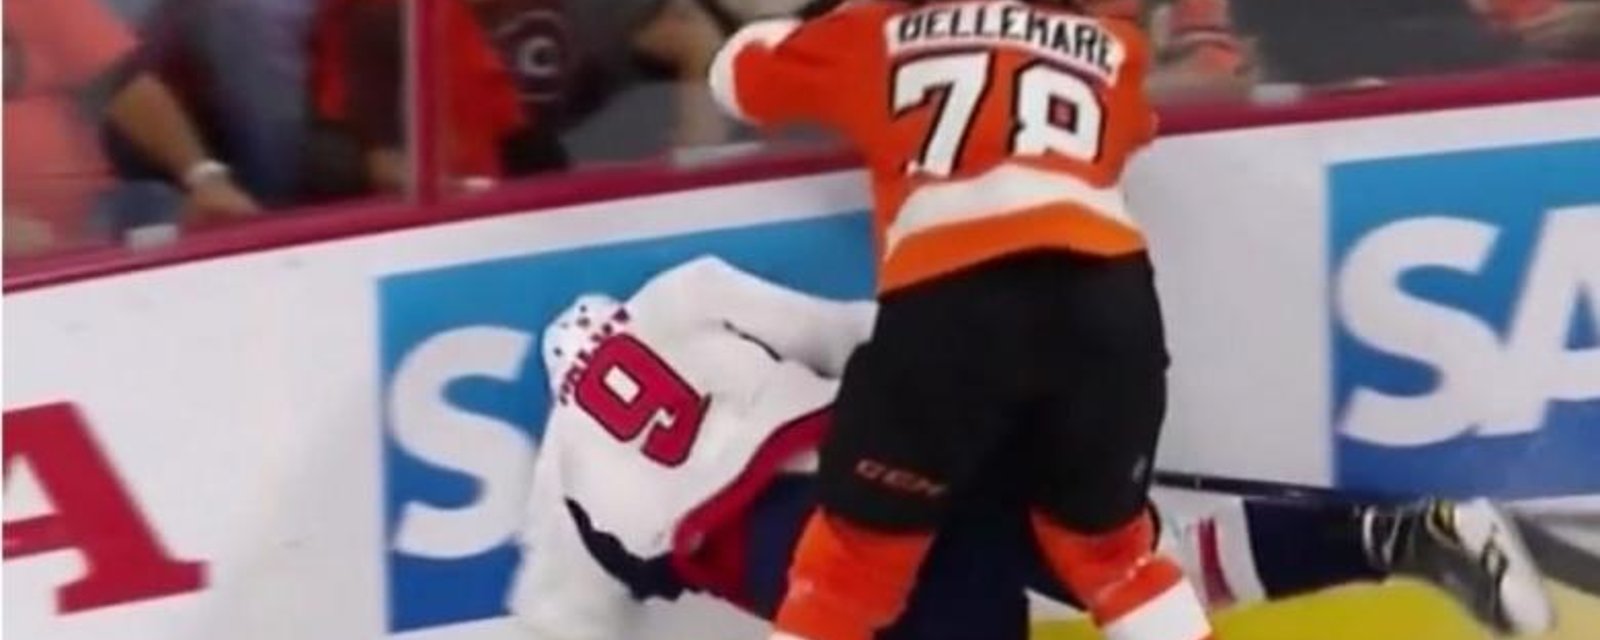 Report: Bellemare will have hearing after very dangerous hit last night.